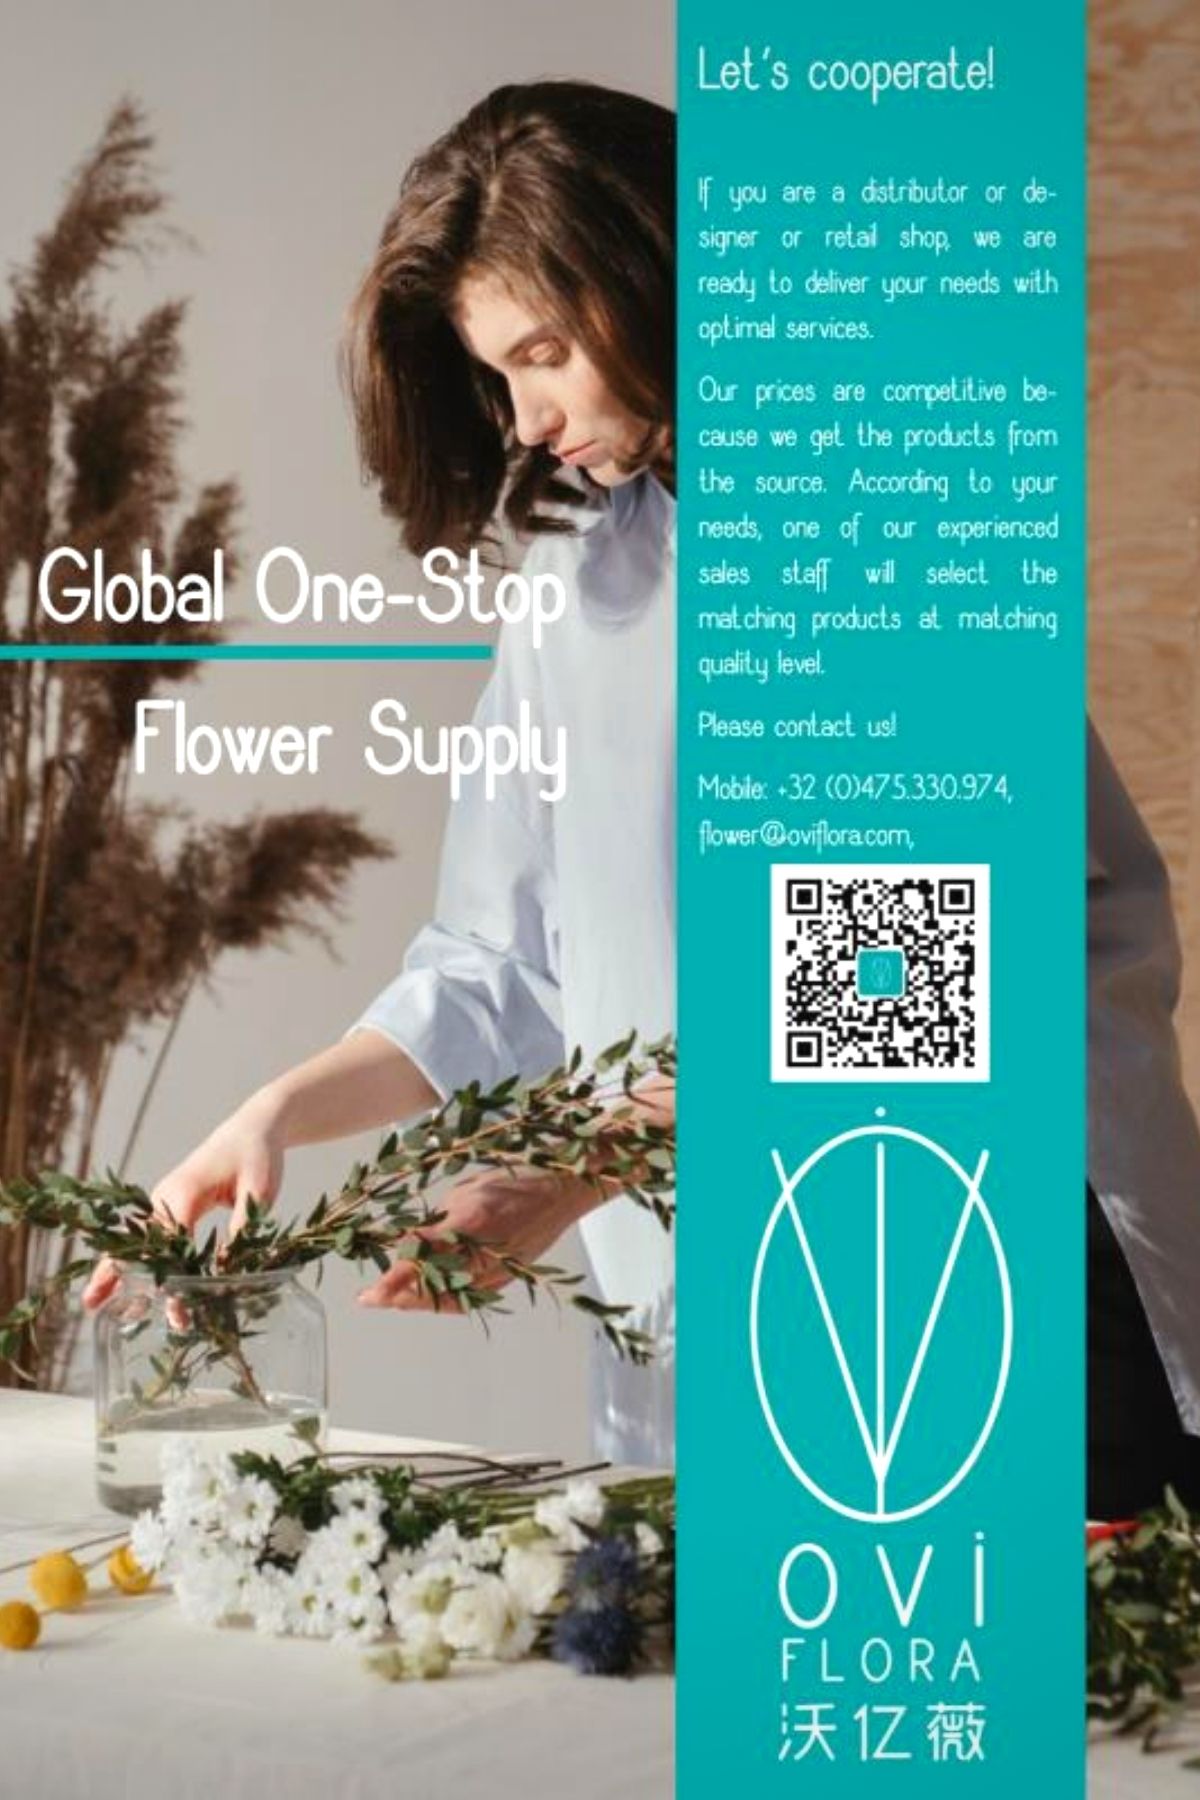 OVIflora Has a Huge Demand for Preserved and Dried Flowers in China - Article on Thursd